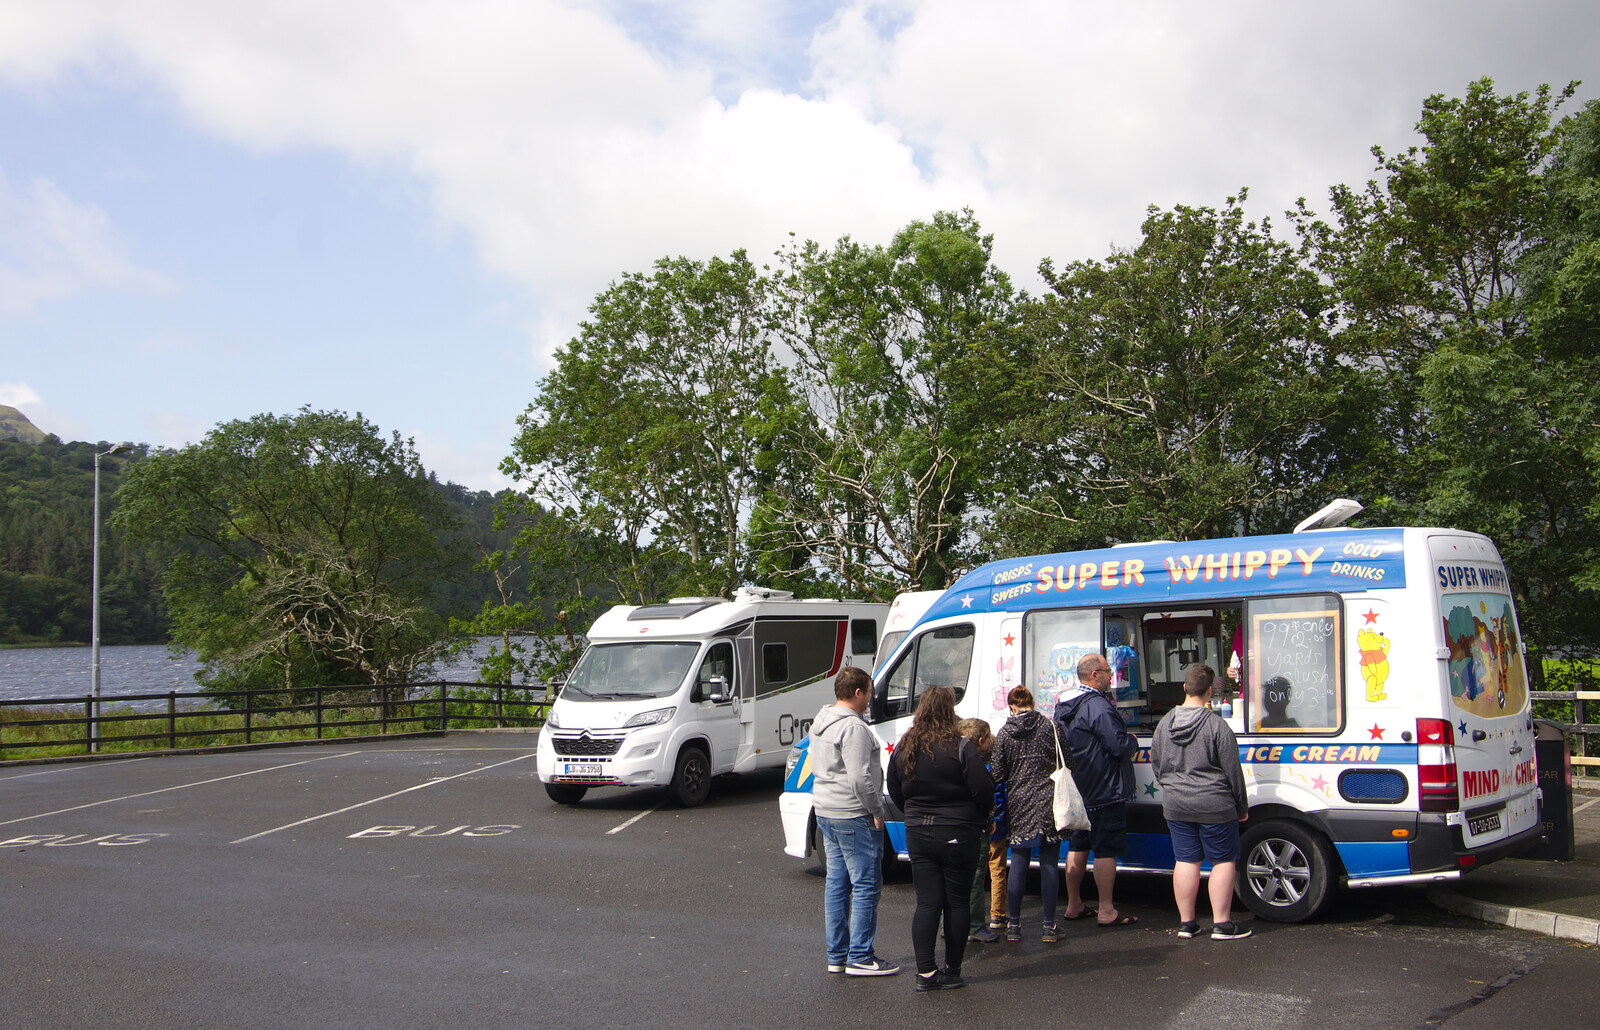 Isobel queues up for ice cream from Glencar Waterfall and Parke's Castle, Kilmore, Leitrim, Ireland - 18th August 2019